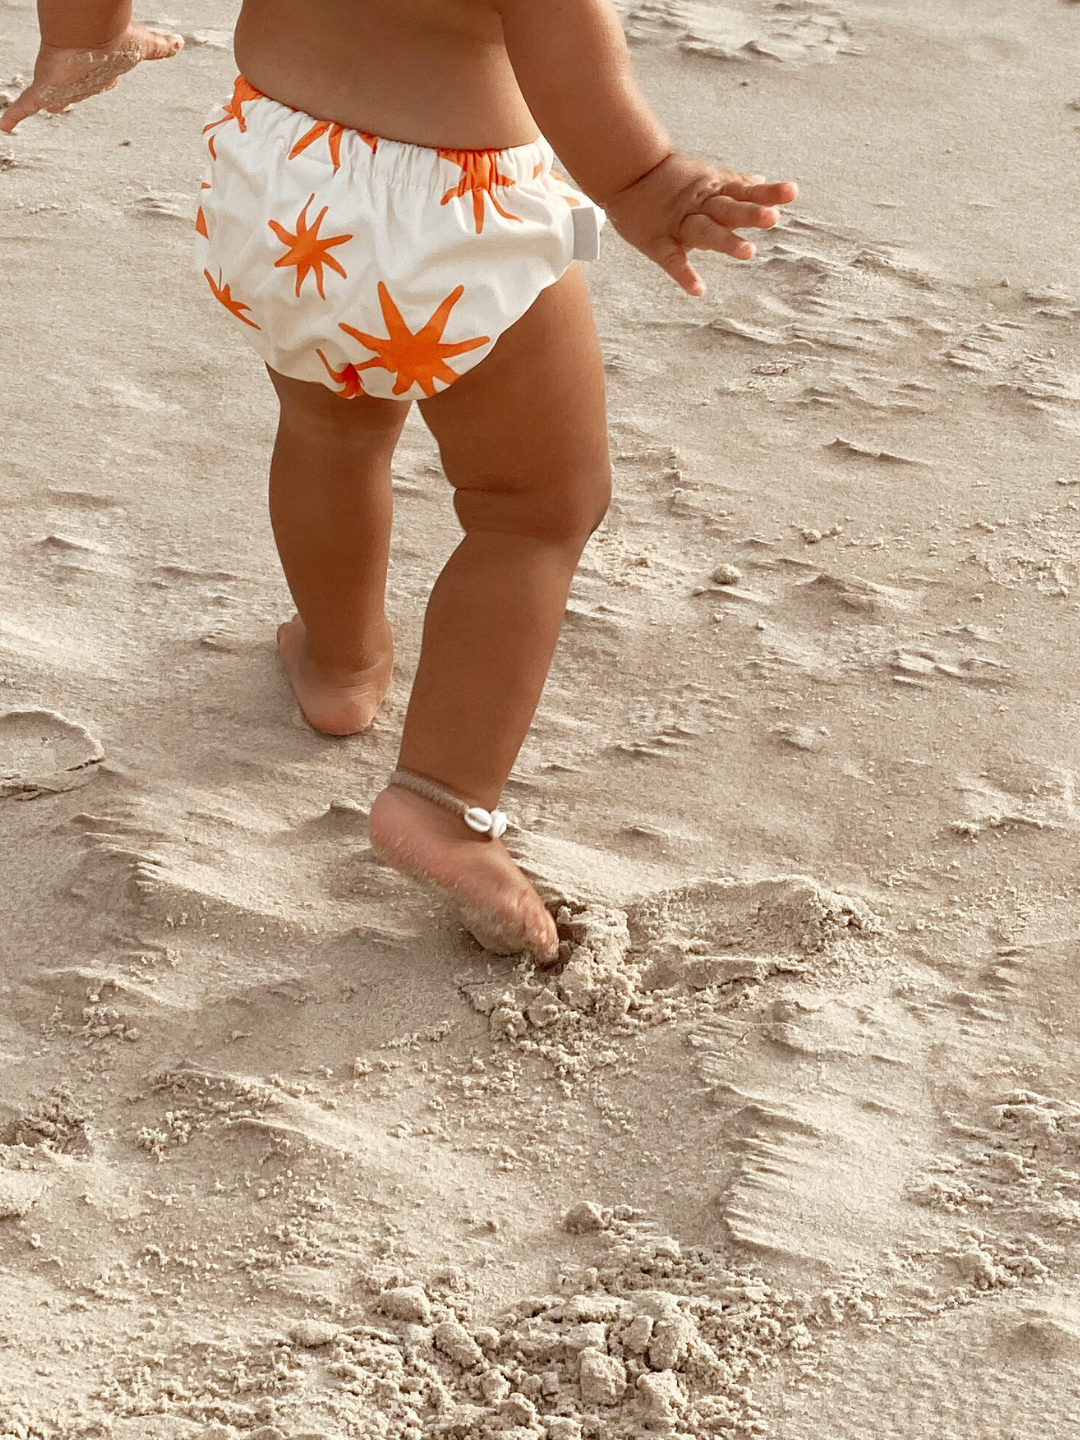 The back view of the swim diaper with an elastic waist with a tie and elastic leg holes on a child at the beach. The diaper is a cream color with orange stars shapes all over.